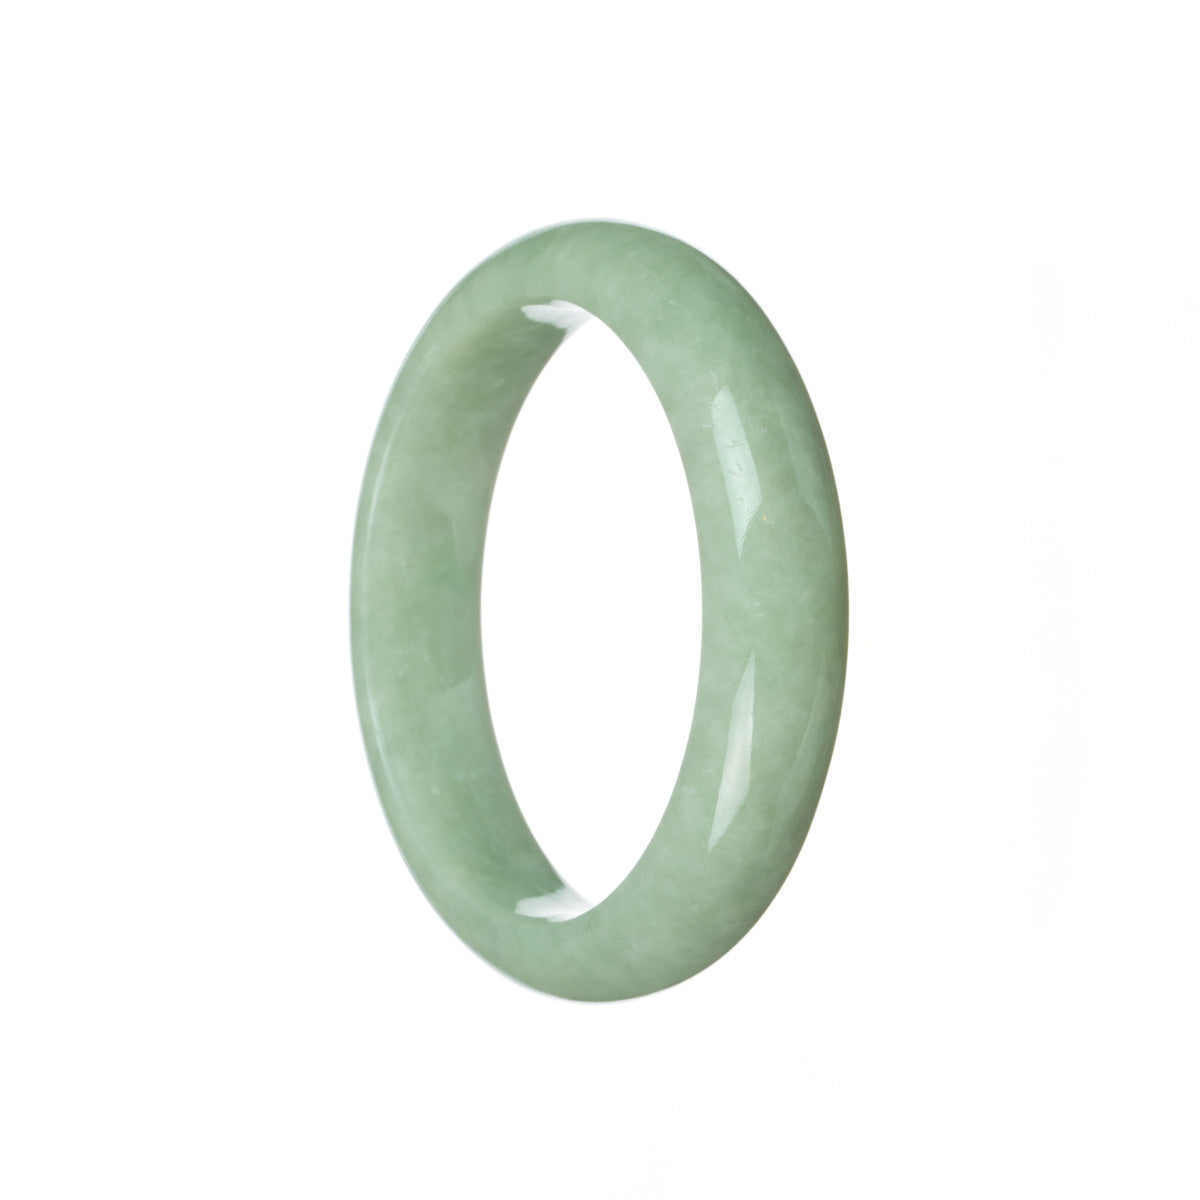 A light green jadeite bangle bracelet with a half-moon design, crafted from authentic Grade A jade. Perfect for adding a touch of elegance to any outfit.